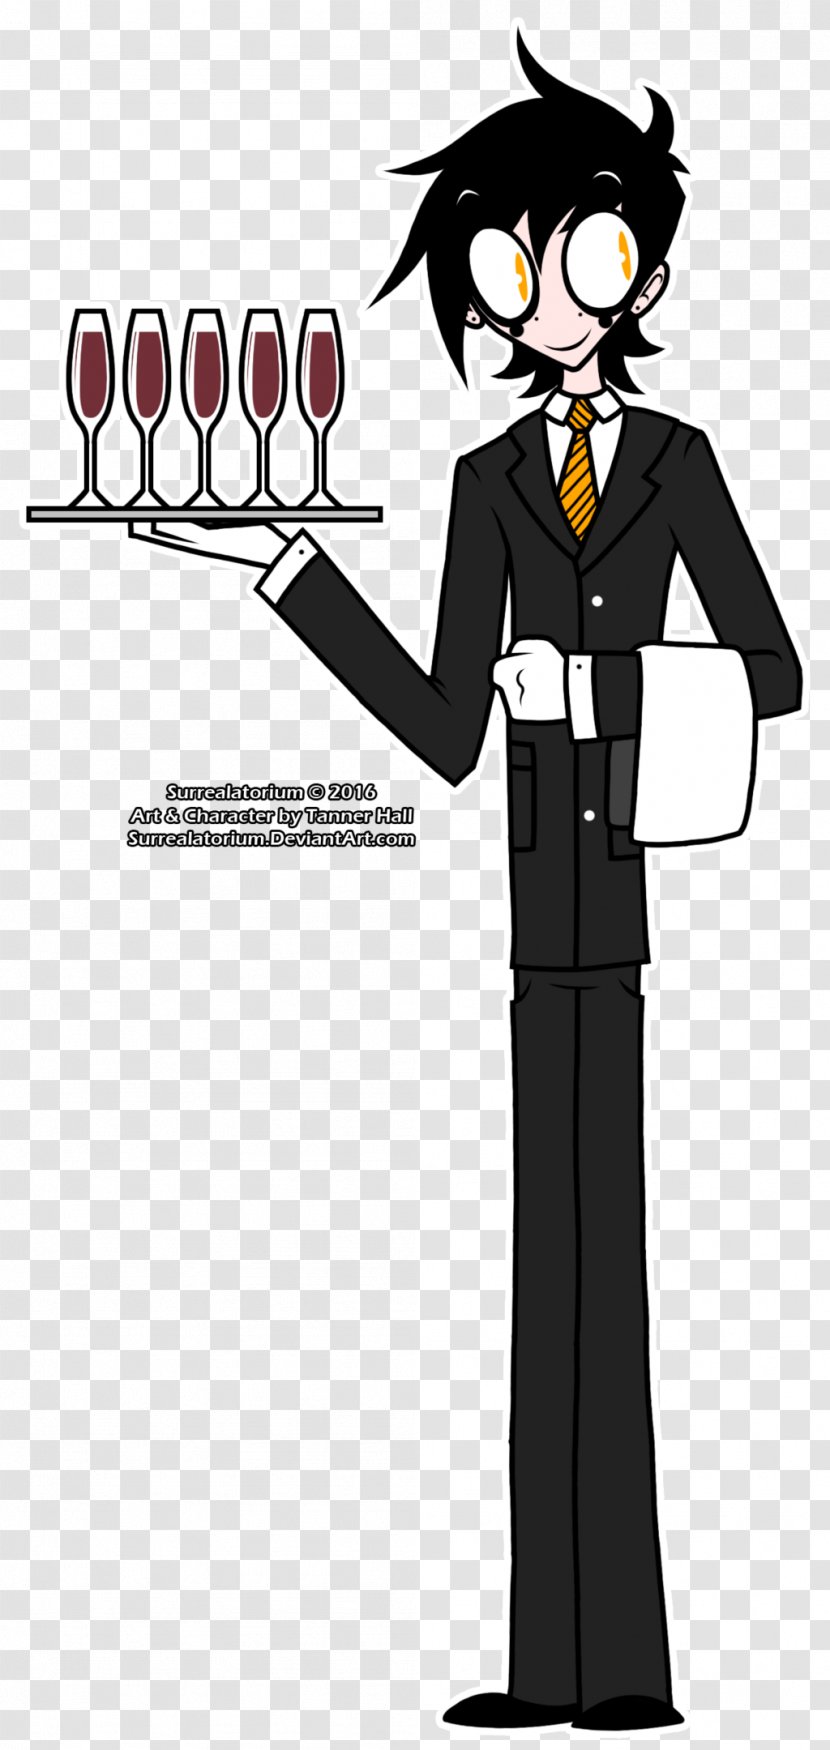 Character Uniform Profession Fiction Animated Cartoon - Heart - Formal Suits Transparent PNG